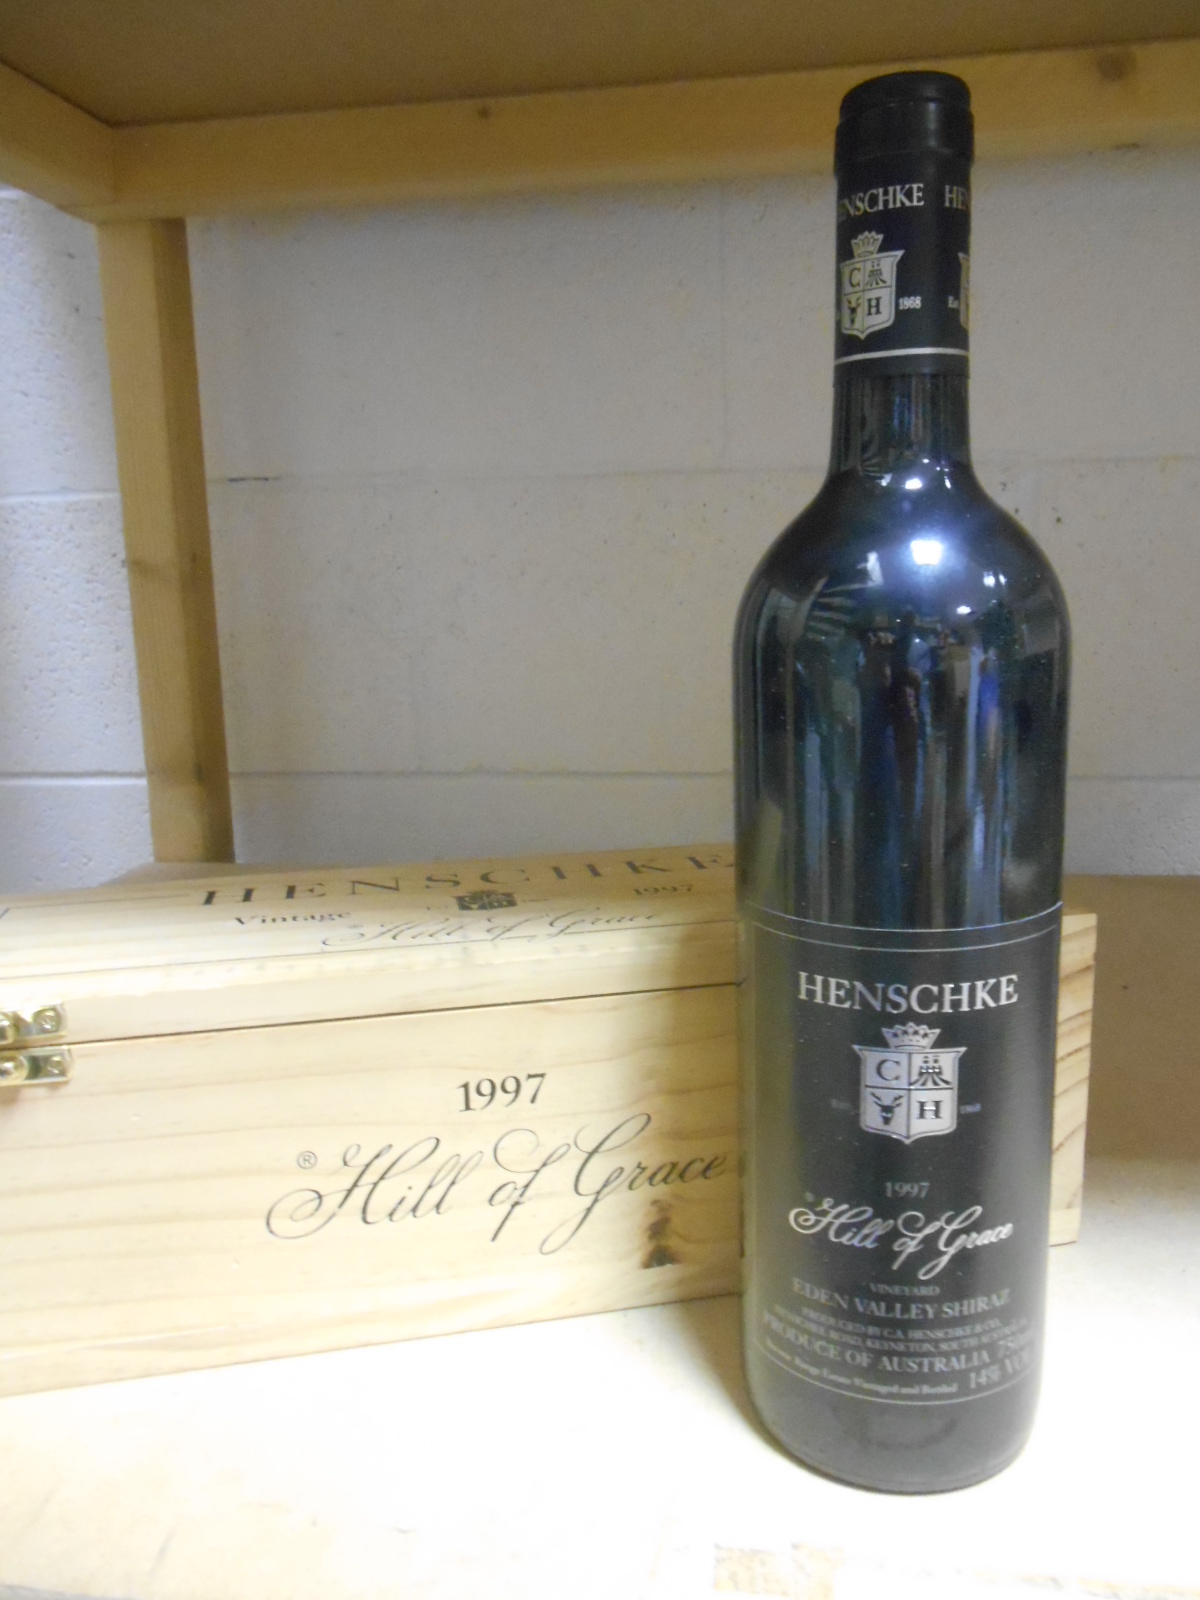 Henschke Hill of Grace 1997, one bottle. Removed from a College cellar